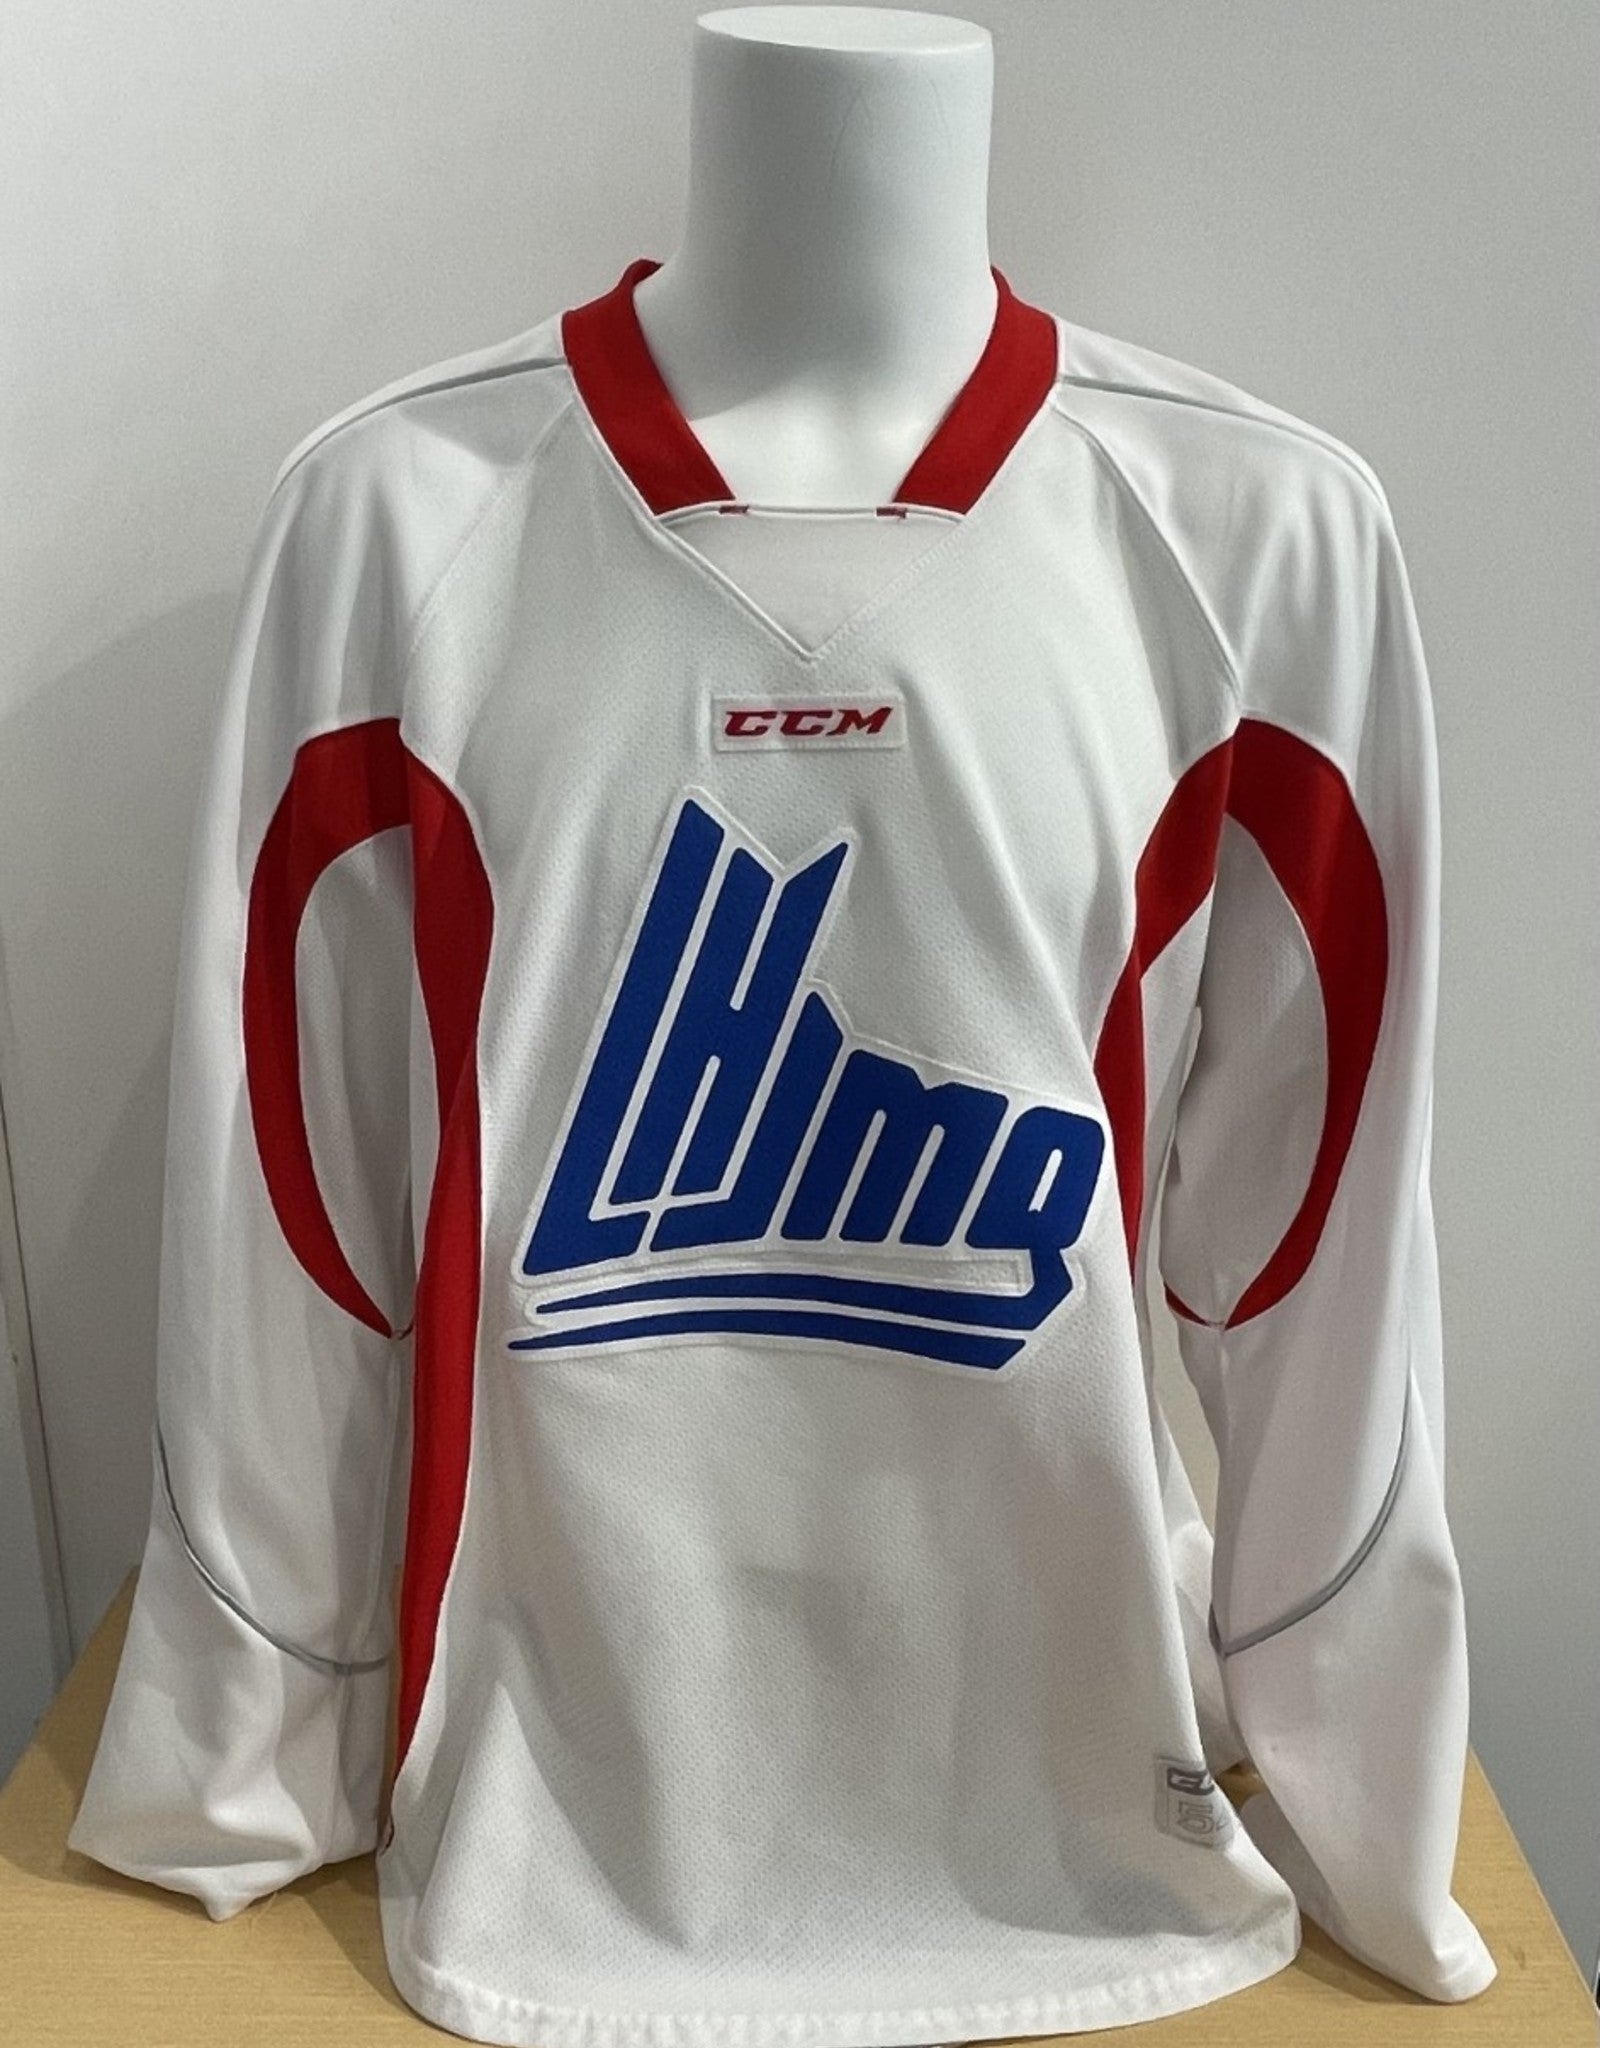 qmjhl jersey products for sale